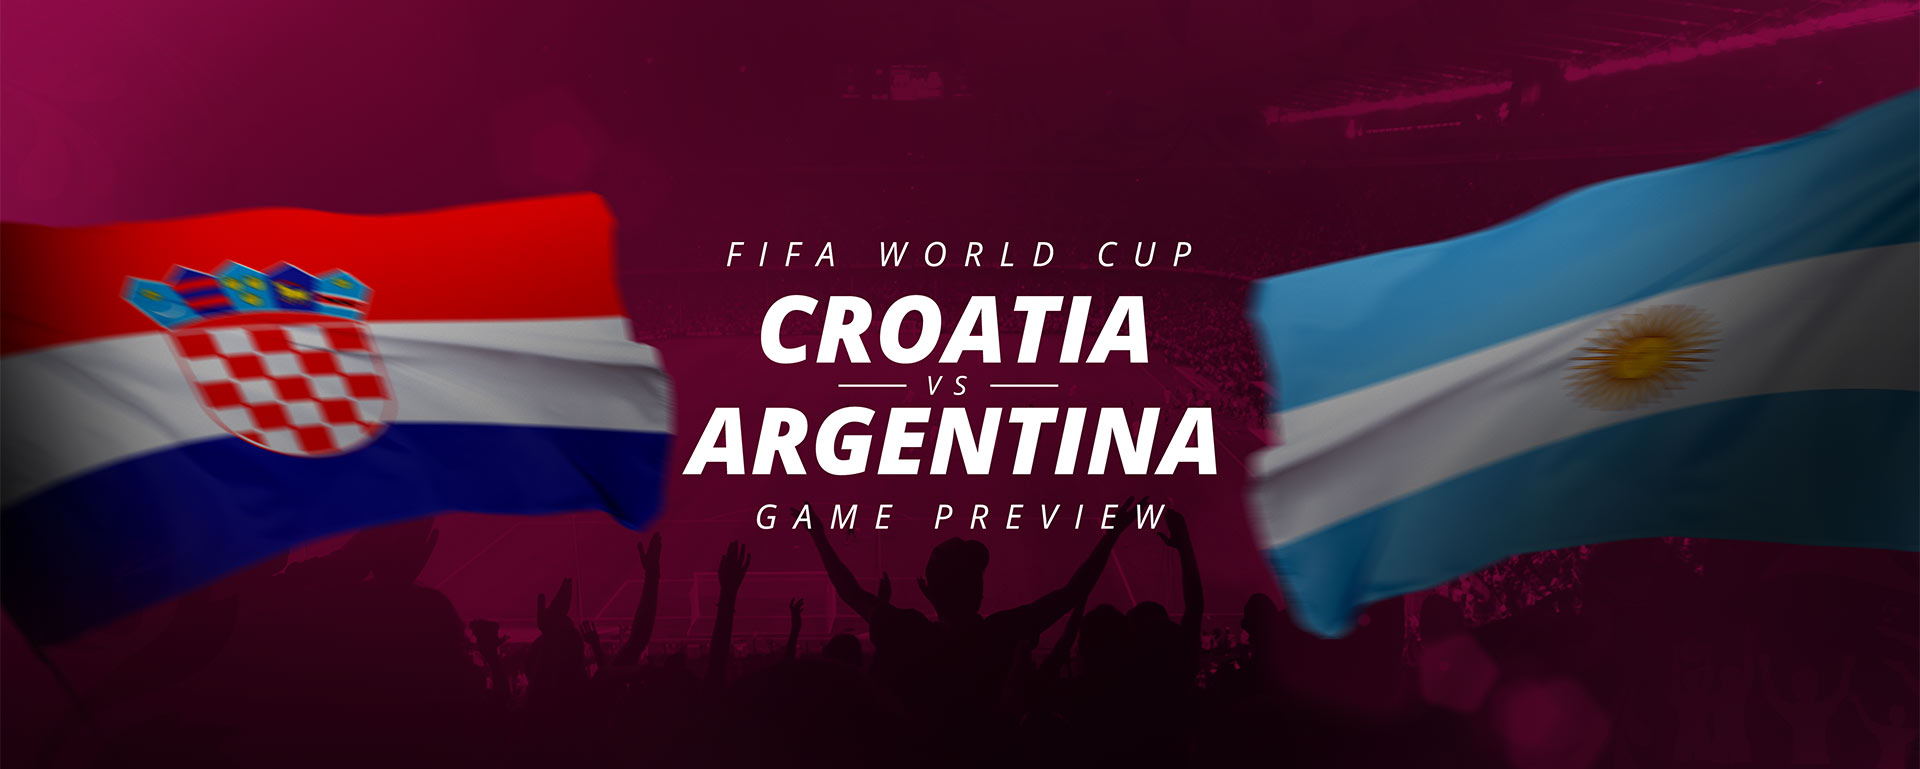 FIFA WORLD CUP: CROATIA V ARGENTINA – GAME PREVIEW